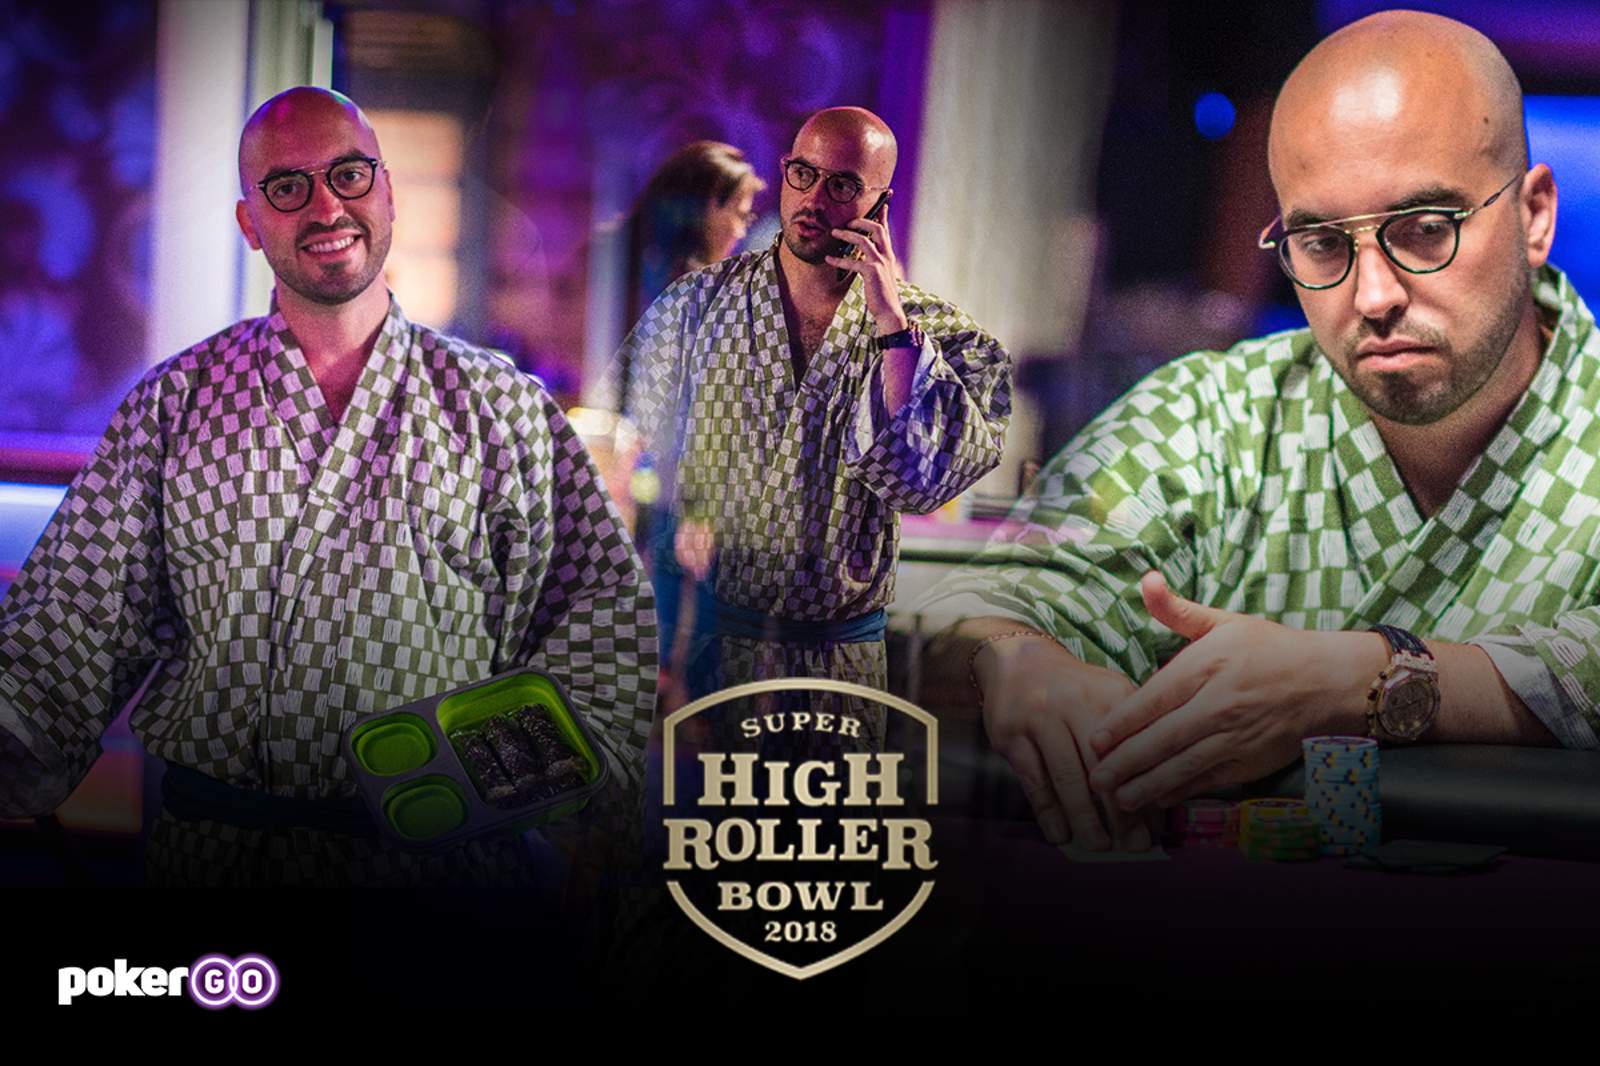 Bryn Kenney Brings Japanese Zen and Swag to the Super High Roller Bowl